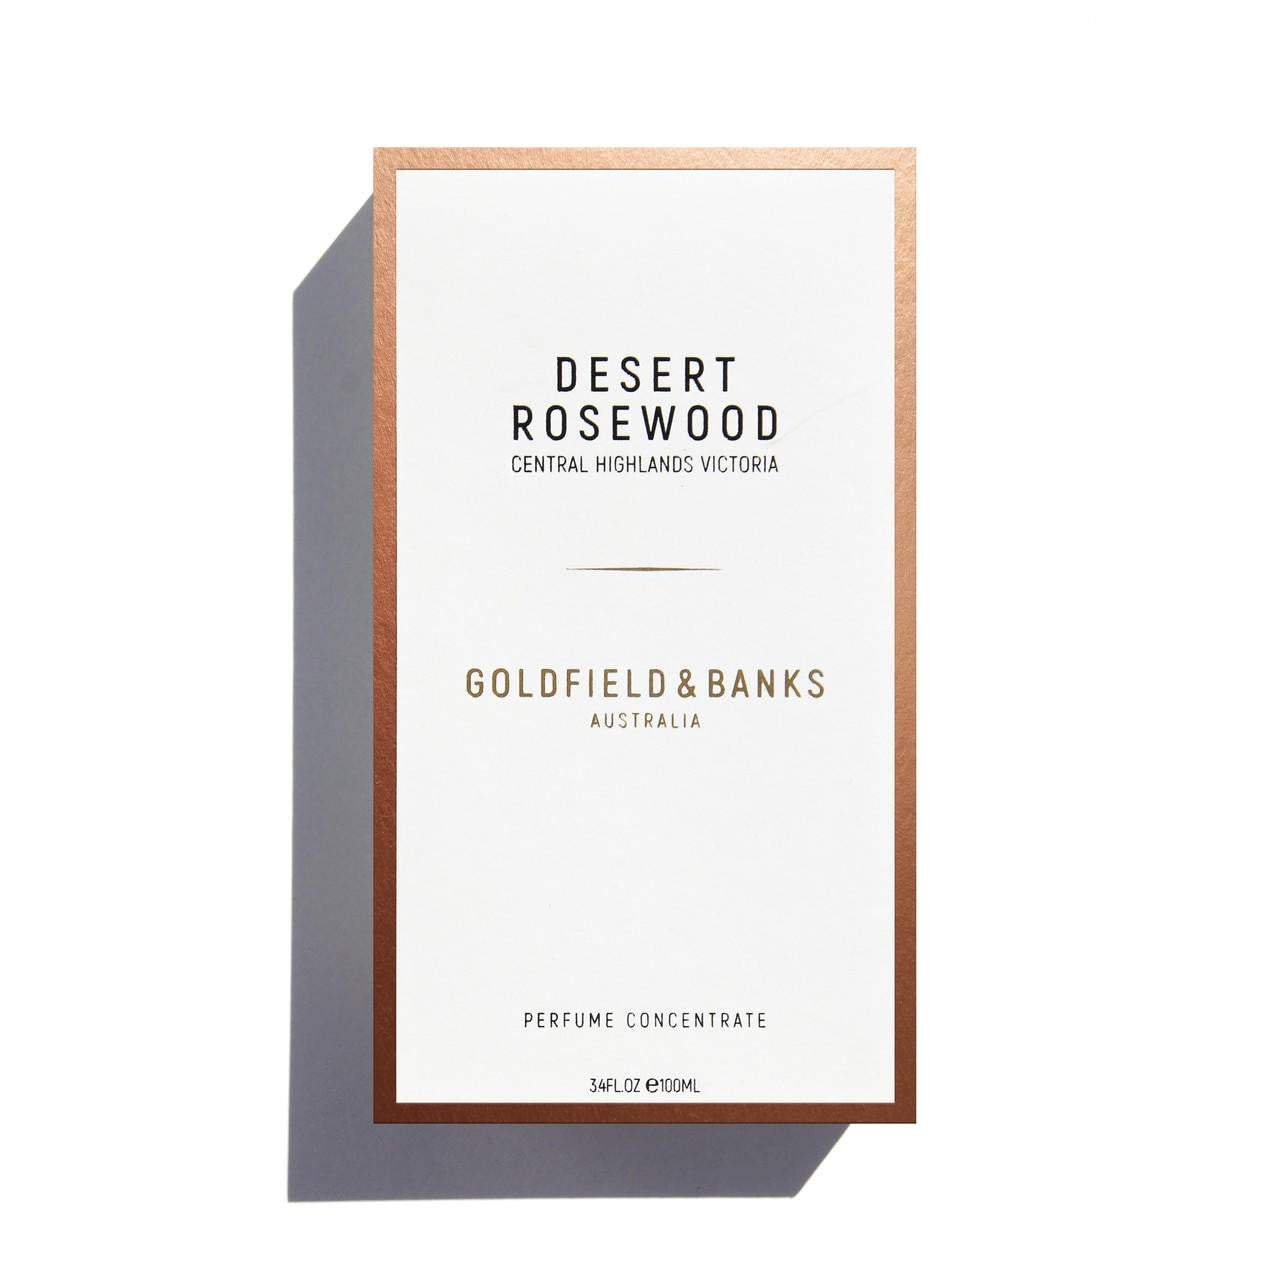  Goldfield & Banks Australia DESERT ROSEWOOD Perfume Concentrate 